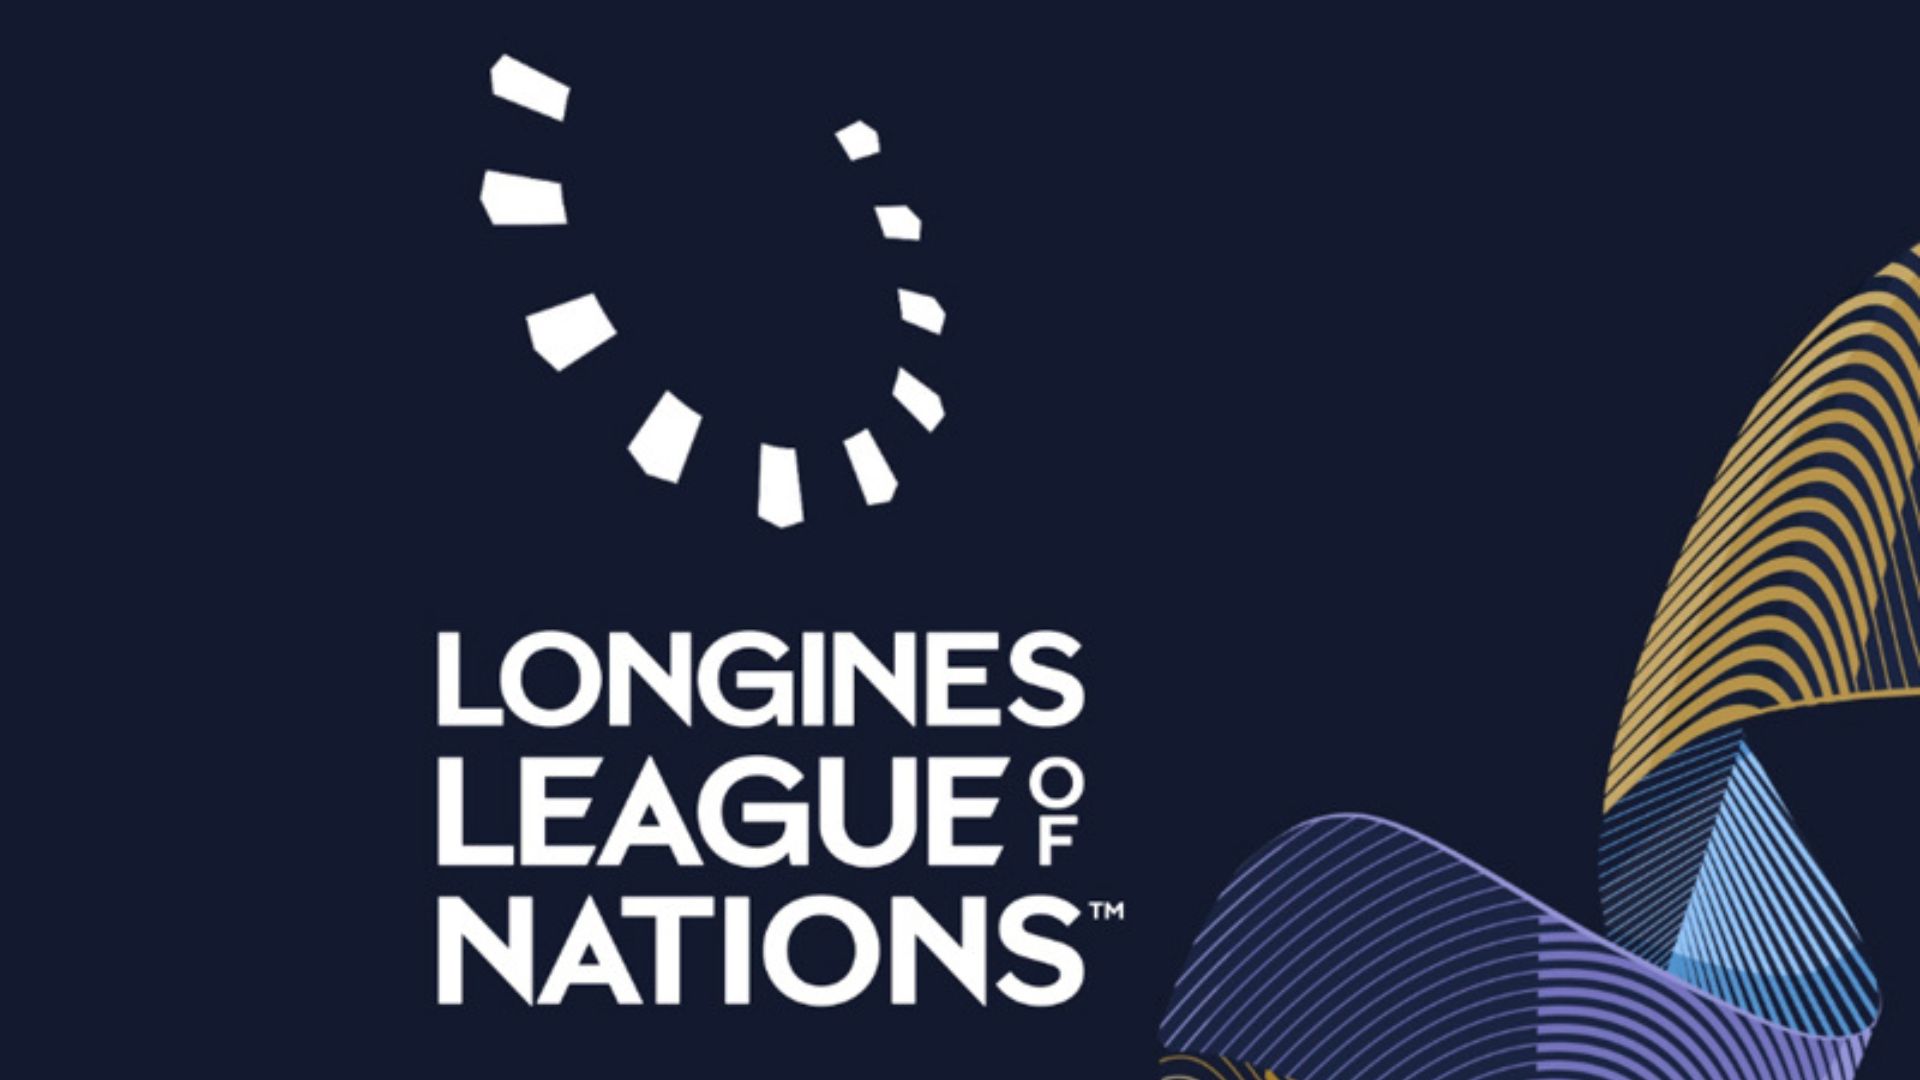 New League of Nations presented by FEI